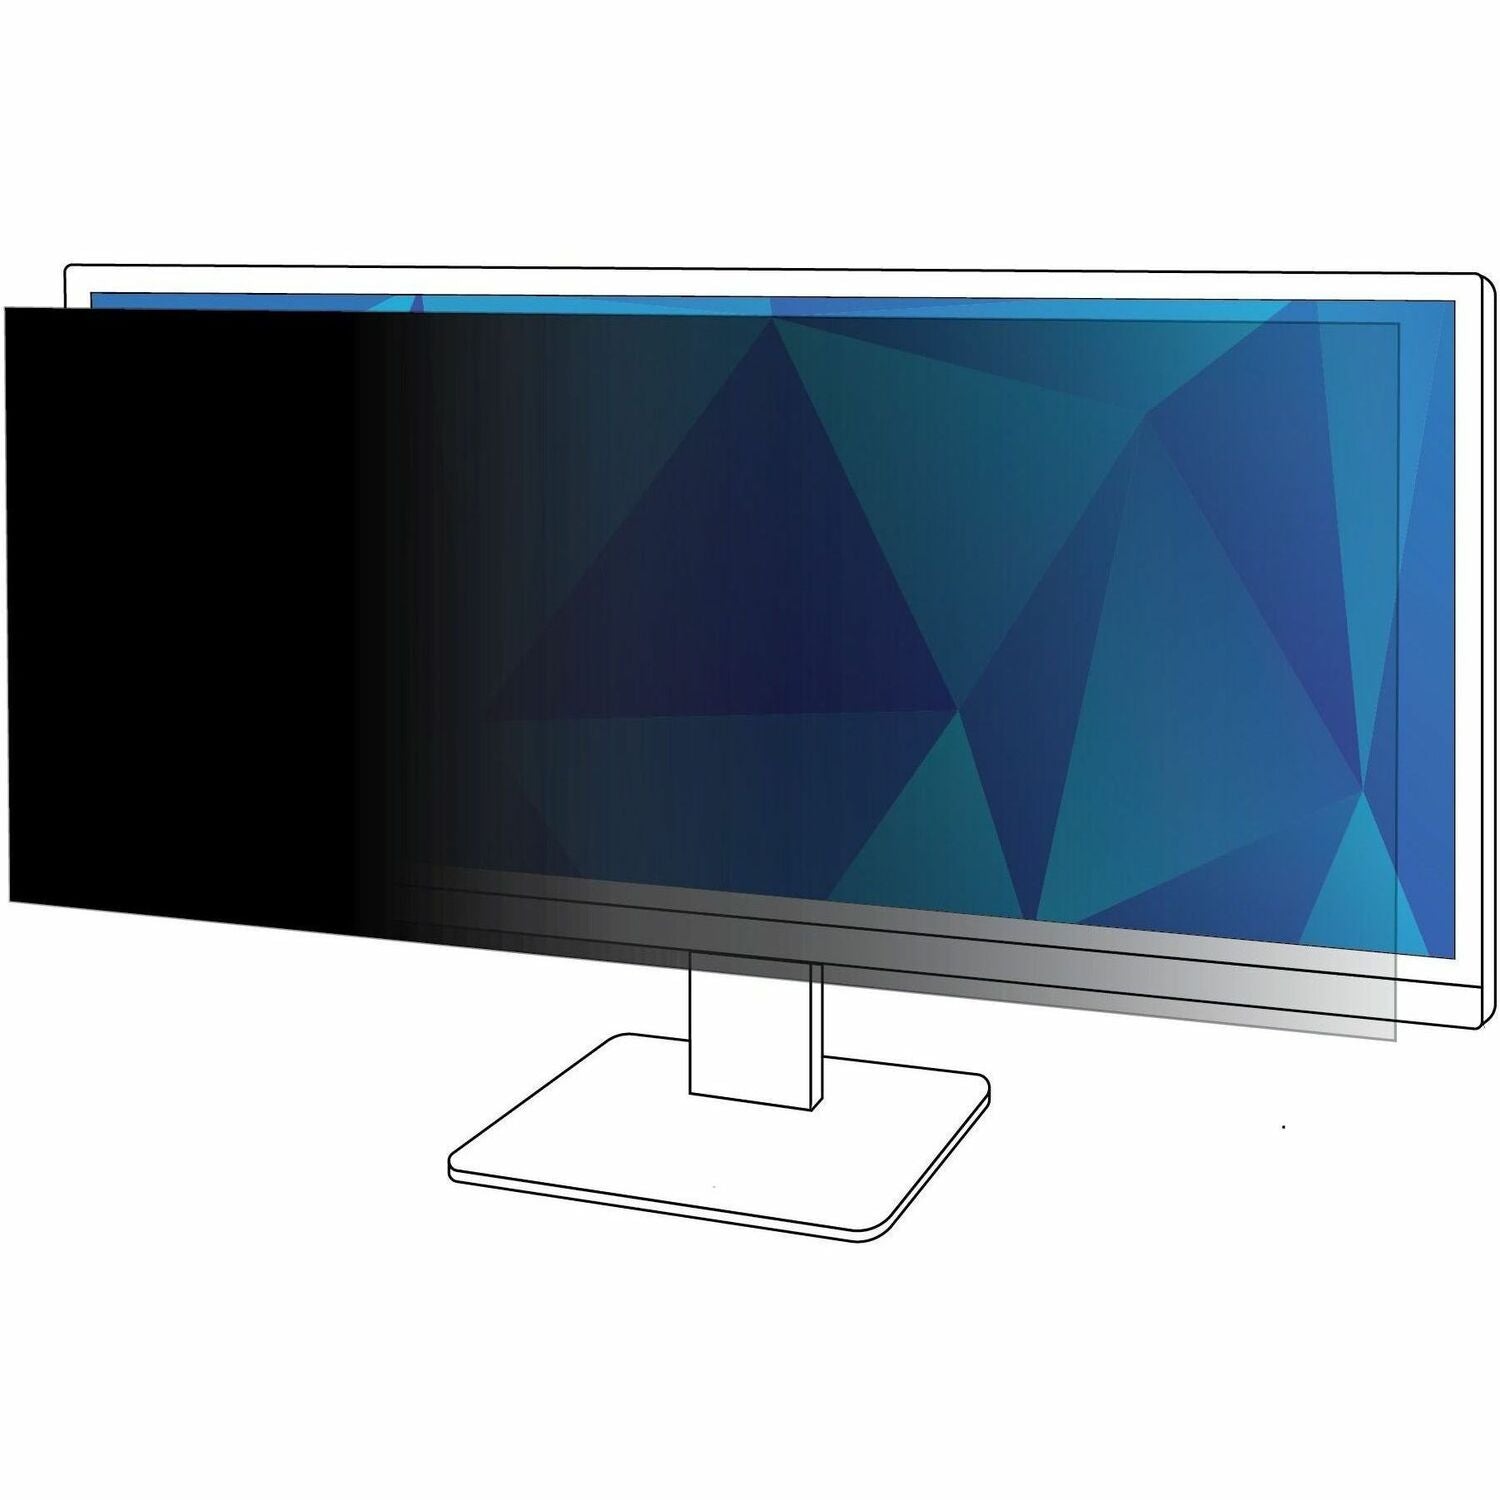 3m-privacy-filter-for-38in-monitor-219-pf380w2b-for-38-widescreen-lcd-monitor-219-scratch-resistant-fingerprint-resistant-dust-resistant-anti-glare_mmmpf380w2b - 1